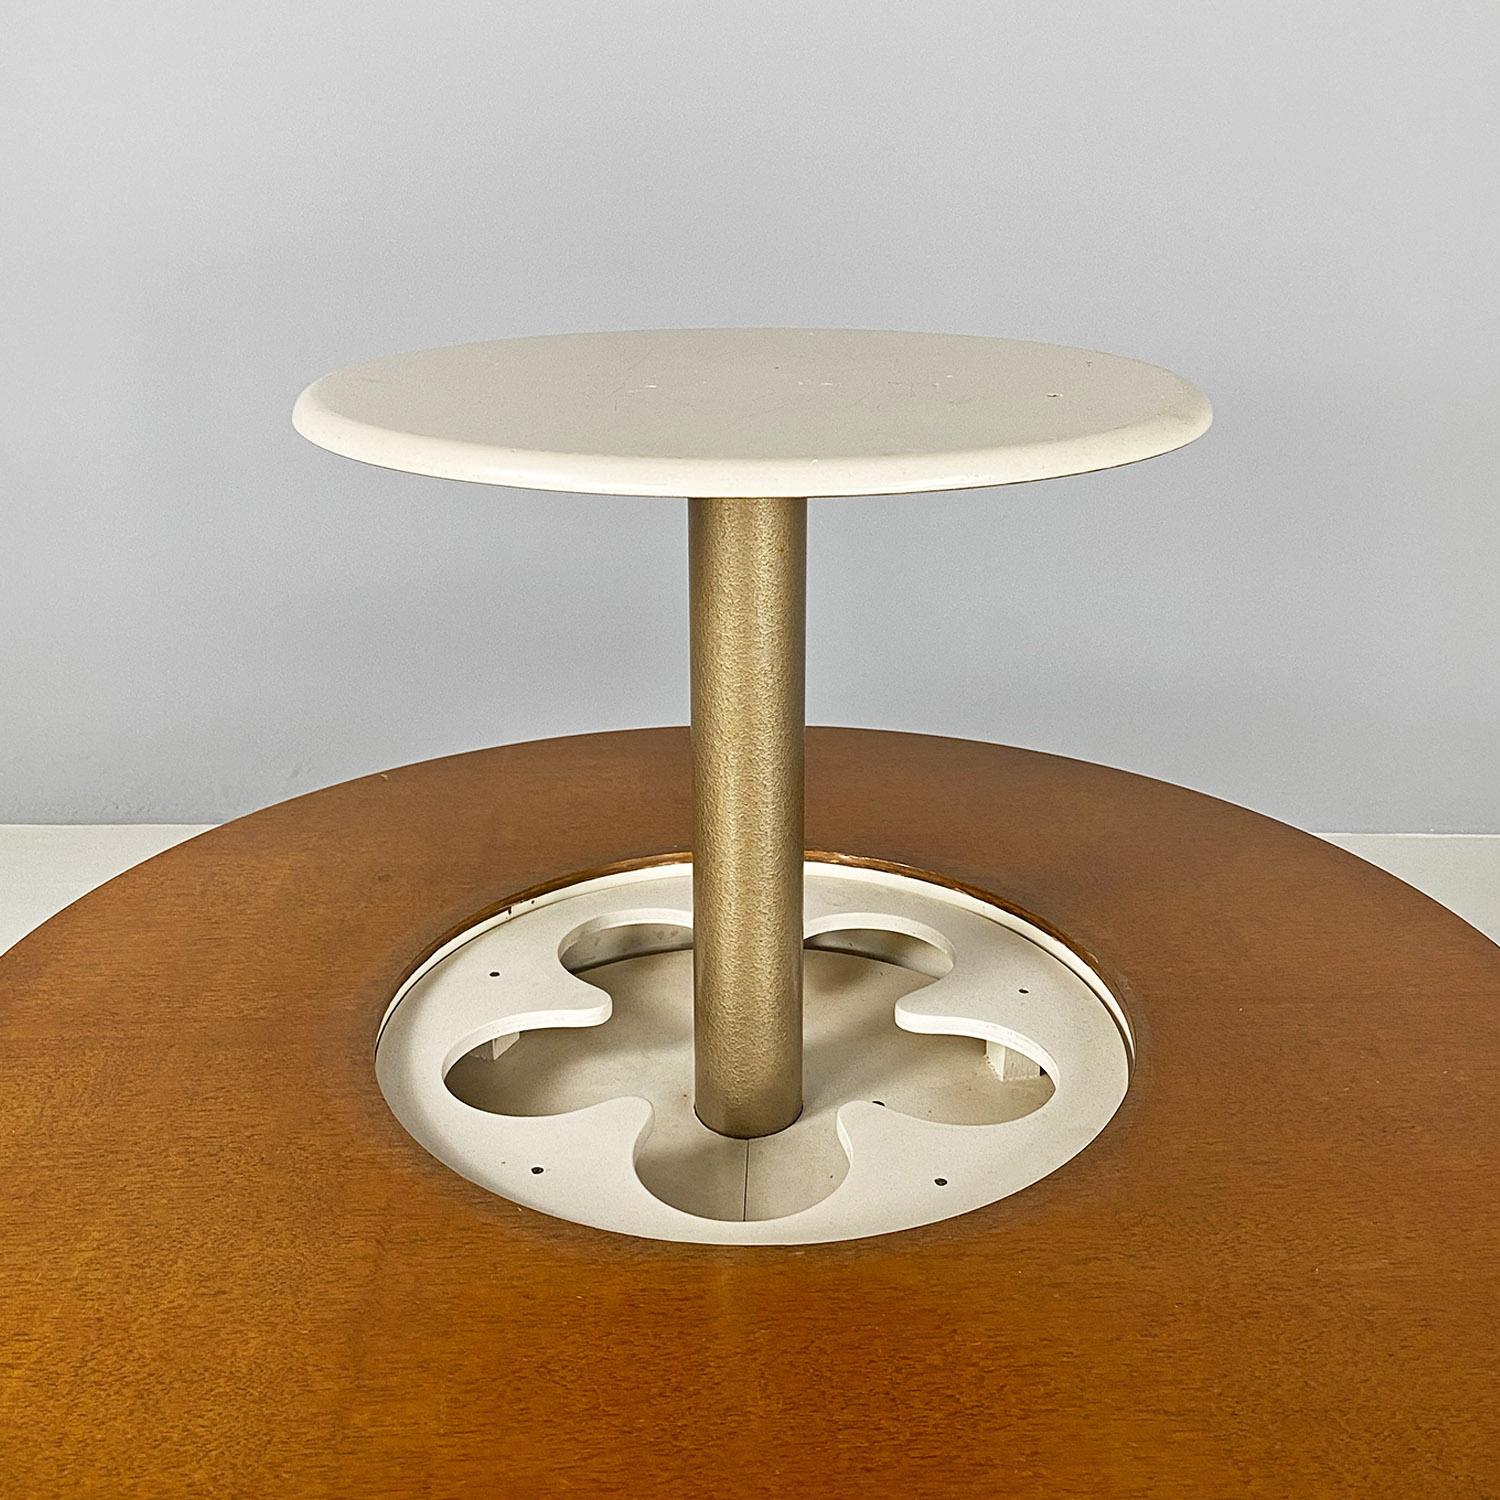 Gervasino coffee table with bottle holder, Italian, made of wood,  1960 ca. For Sale 4